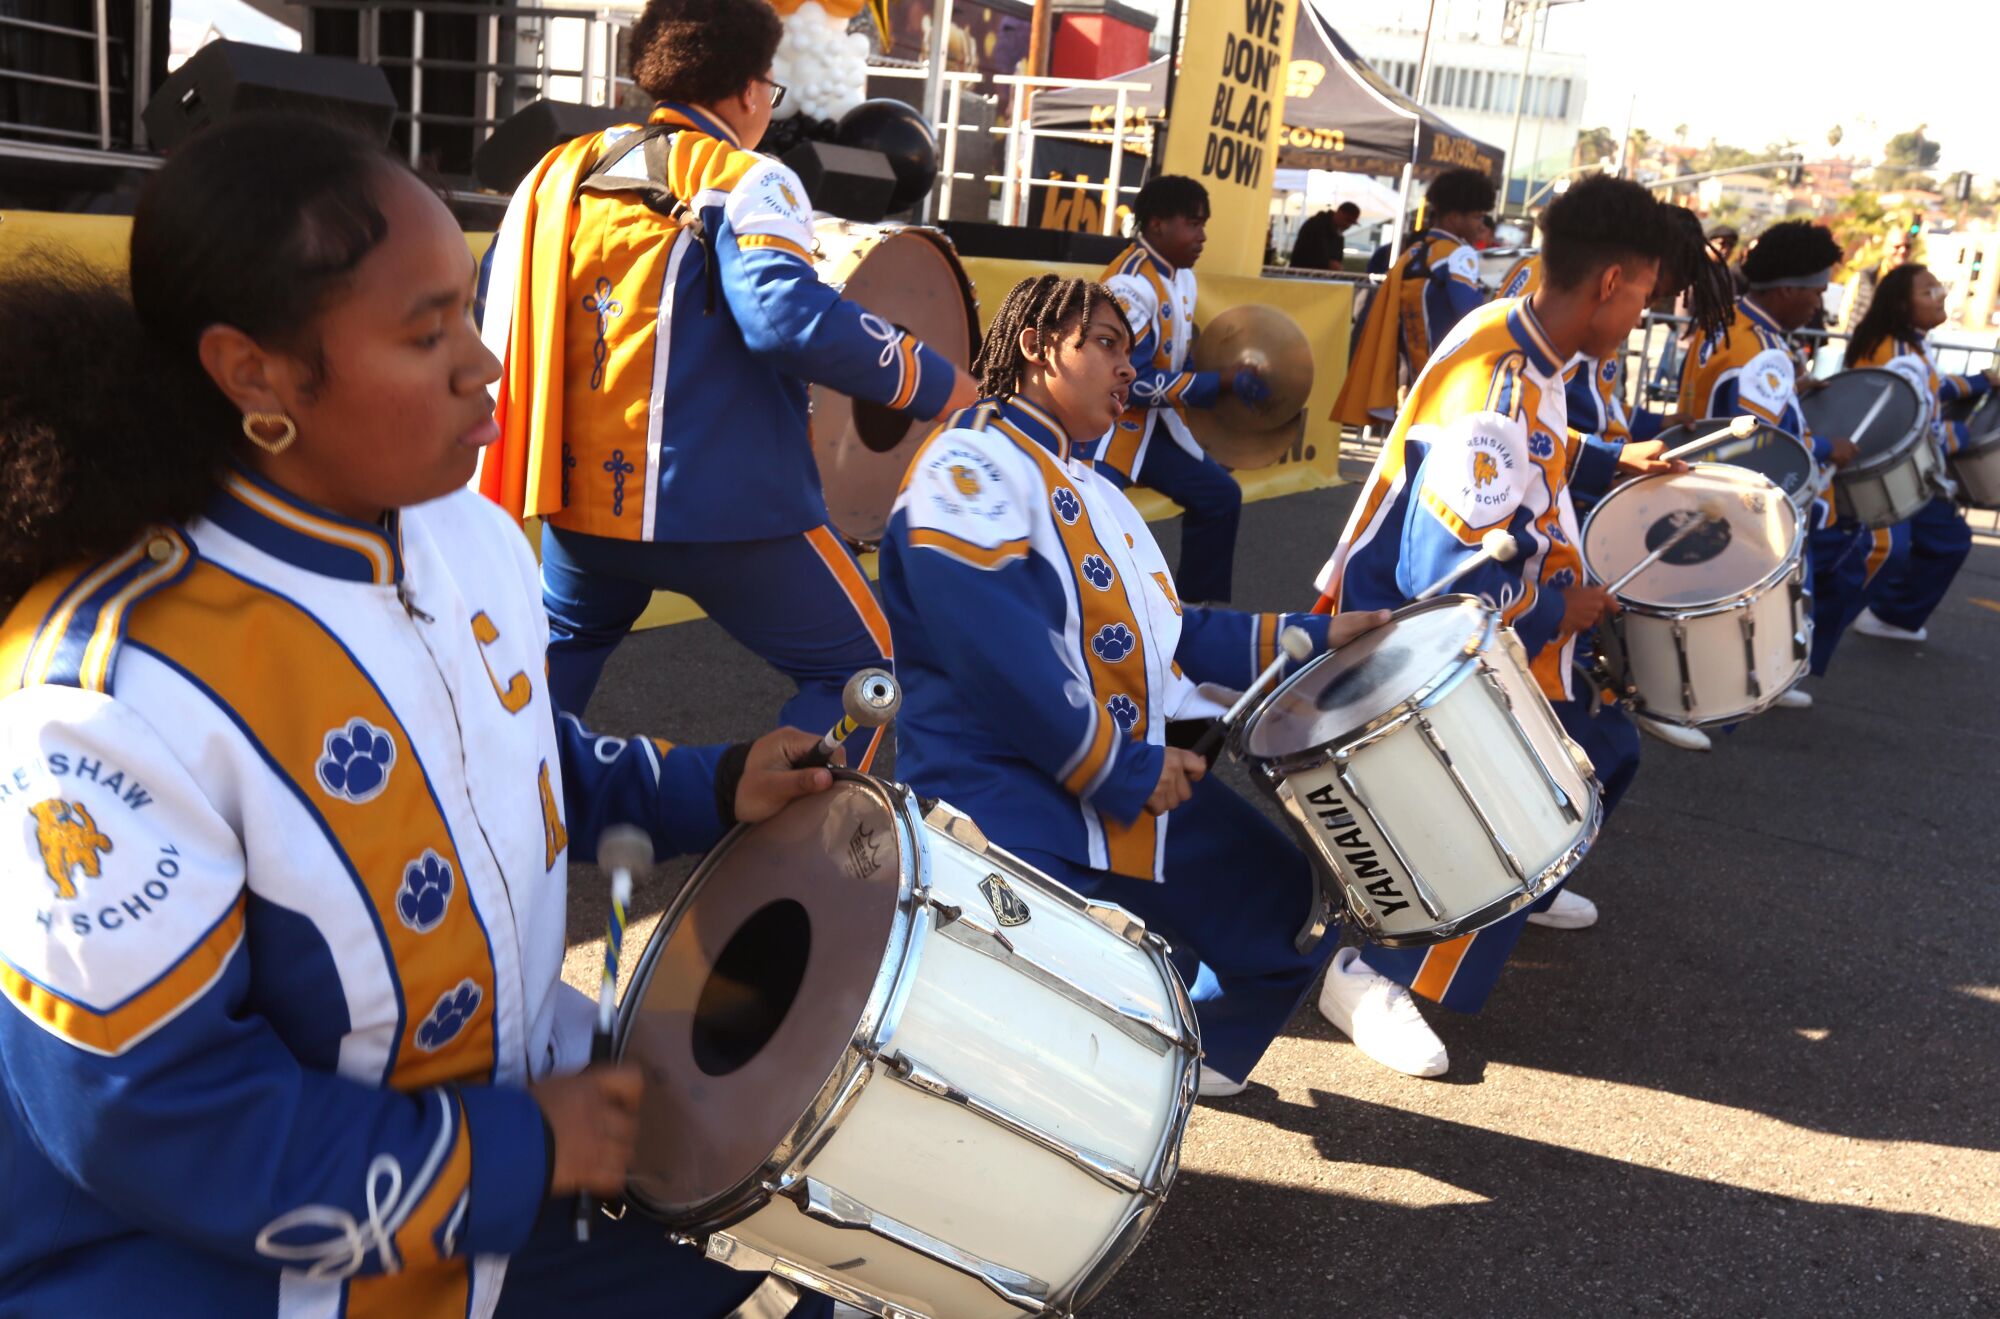 Members of the Crenshaw High School Marching Band perform at the KBLA 1580 Talk Radio "homecoming" event 